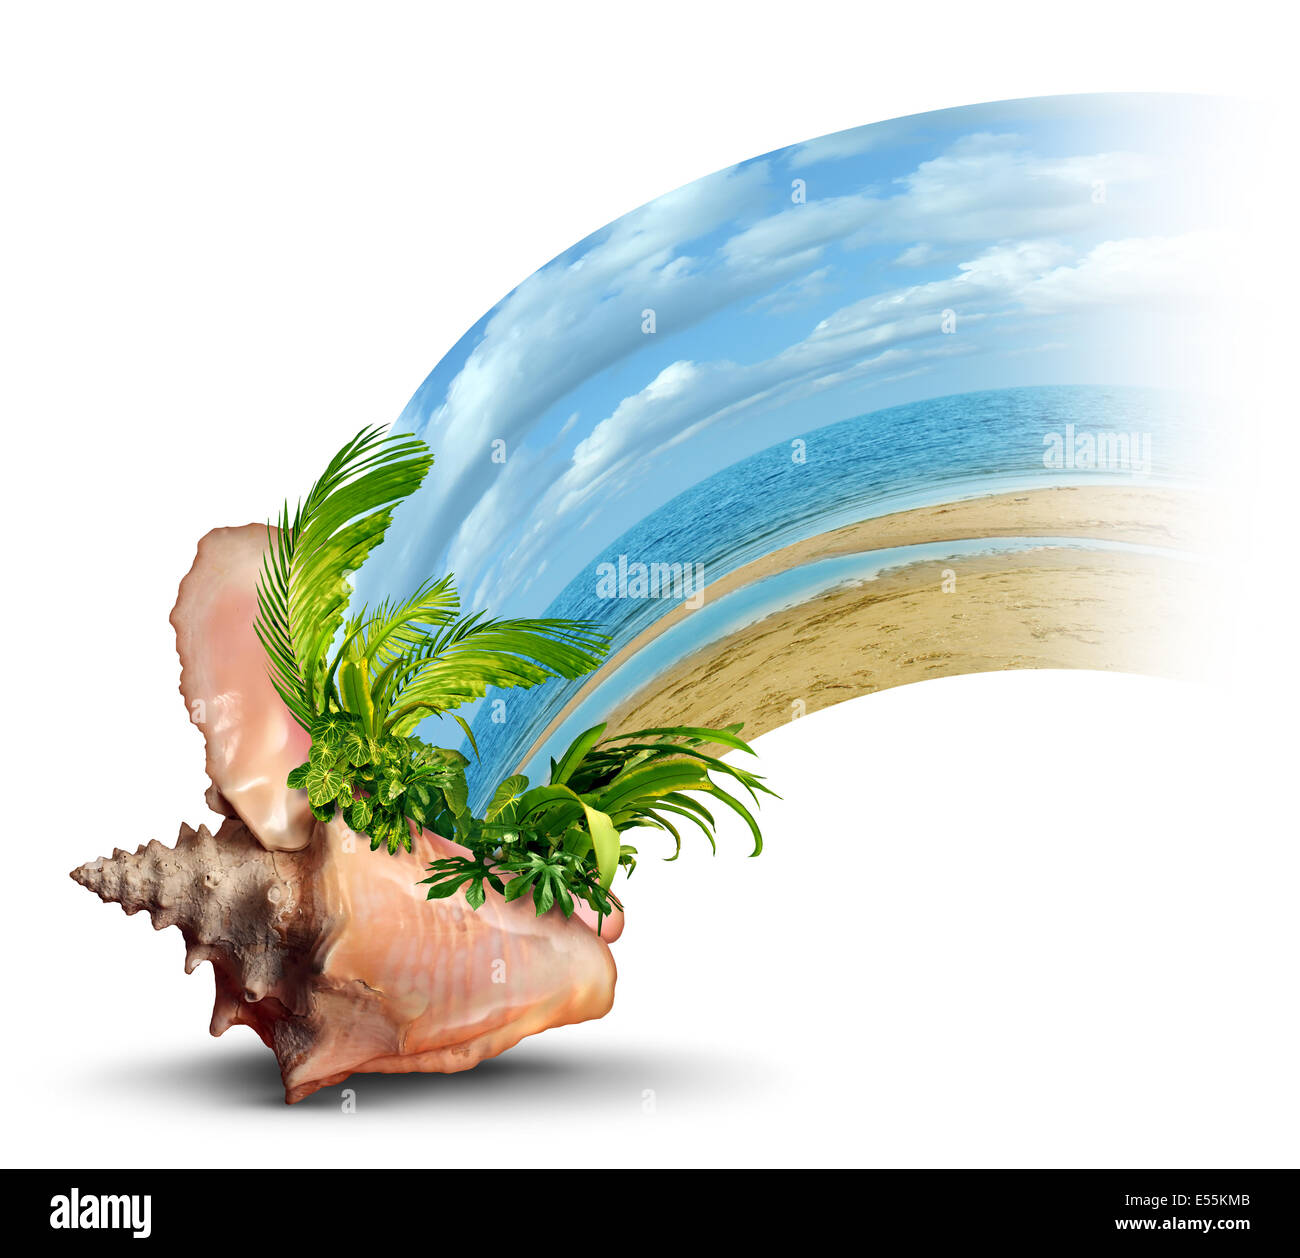 Vacation destination travel and liesure concept as an ocean conch shell with tropical plants and hot sandy beach emerging as a fun in the sun symbol of a relaxation escape shaped as a wave on a white background. Stock Photo